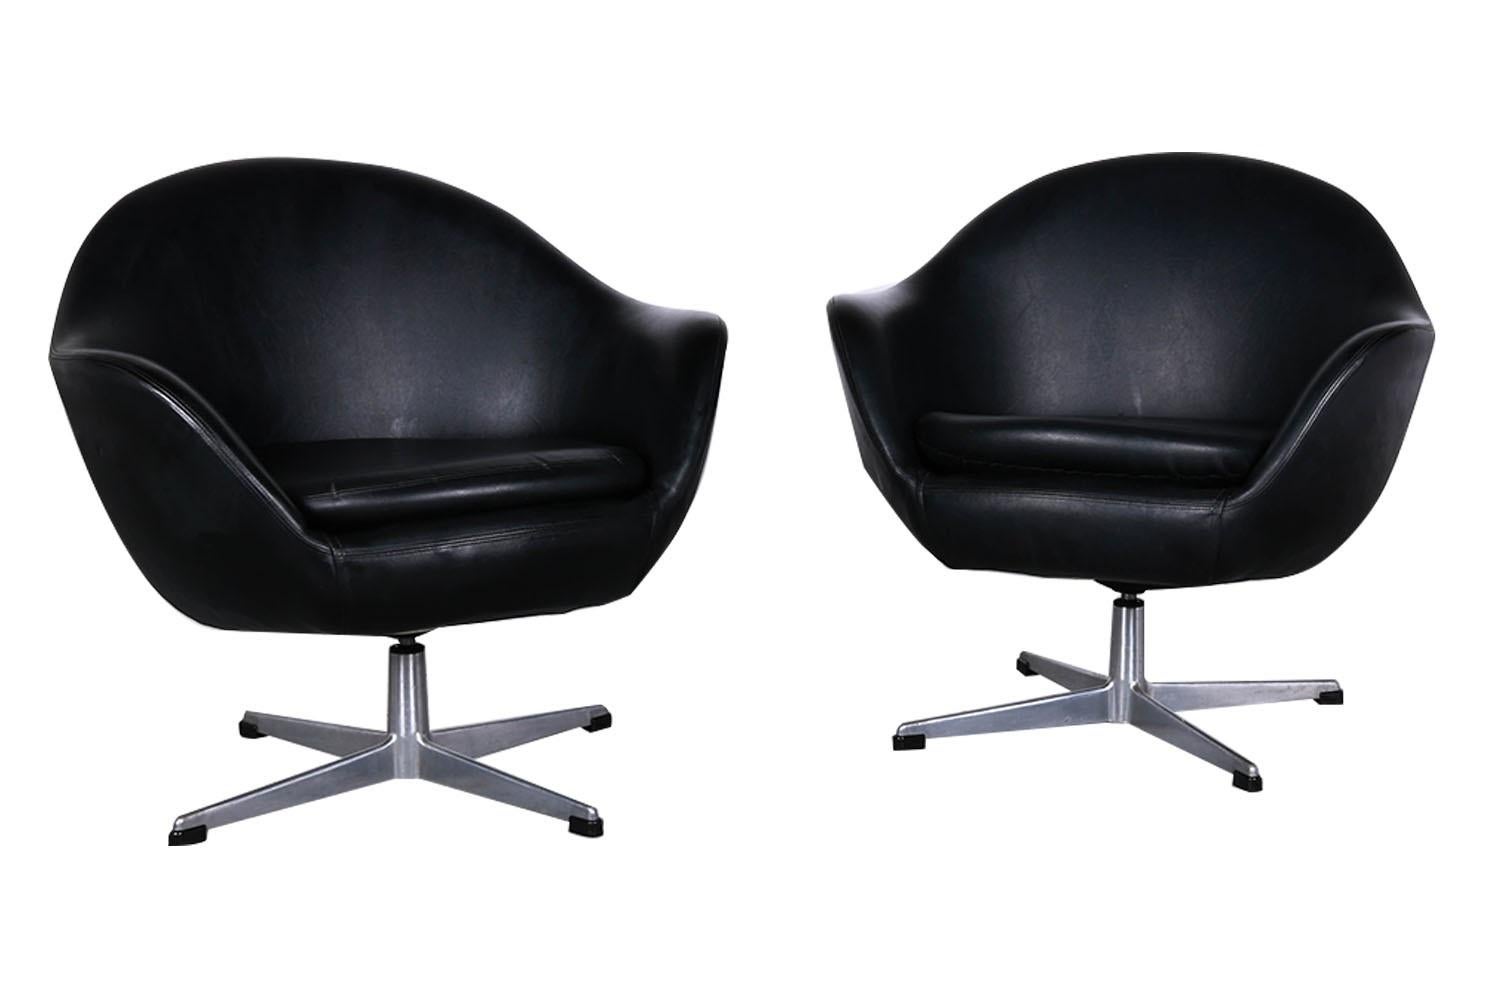 A beautiful pair of Mid-Century Black Overman Swedish, vintage, swivel, pod, lounge chairs designed by Swedish designer Carl Eric Klote for Overman Denmark in the 1960’s. The pair is comfortable and remarkably high quality, with gorgeous, chromed